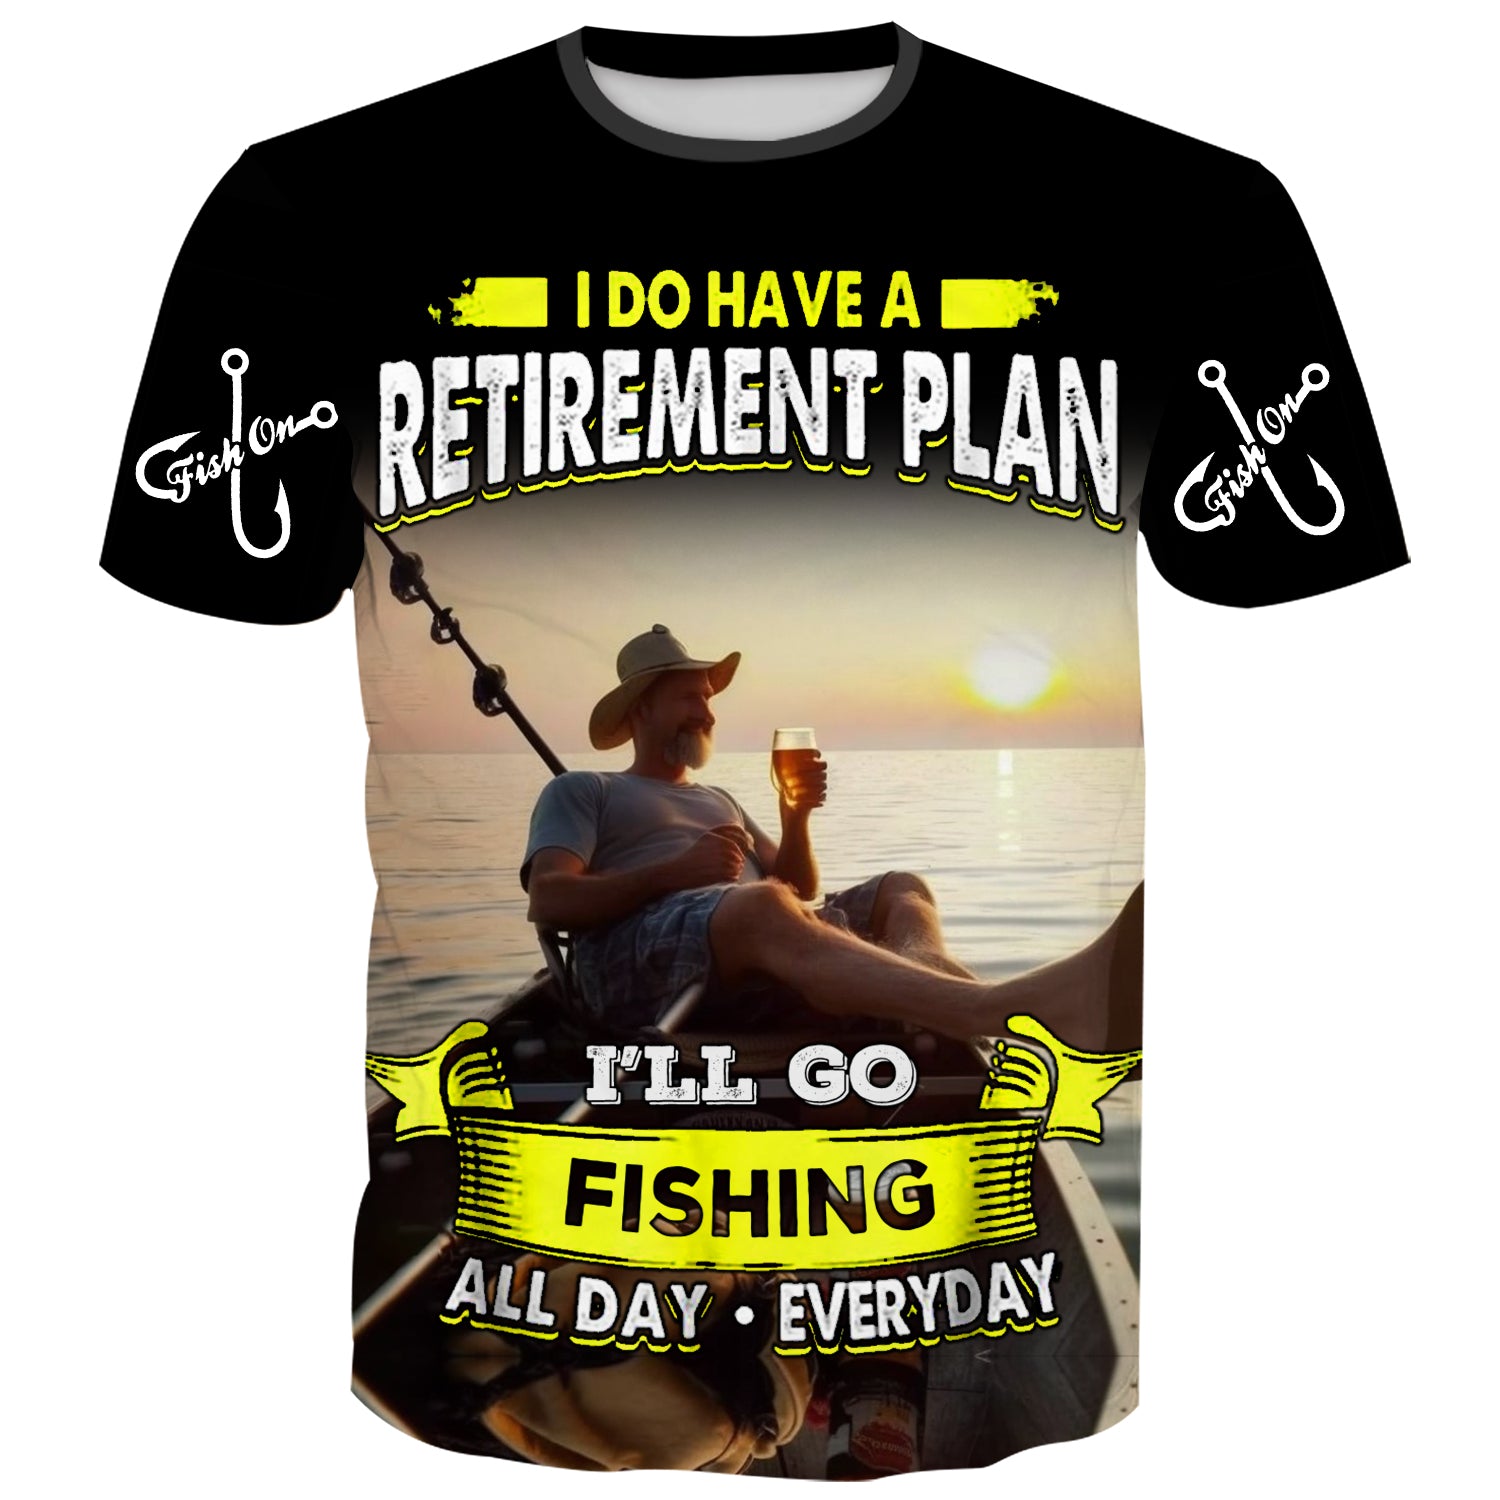 Fishing shirt for men with funny saying "I have a retirement plan: I will go fishing all day everyday